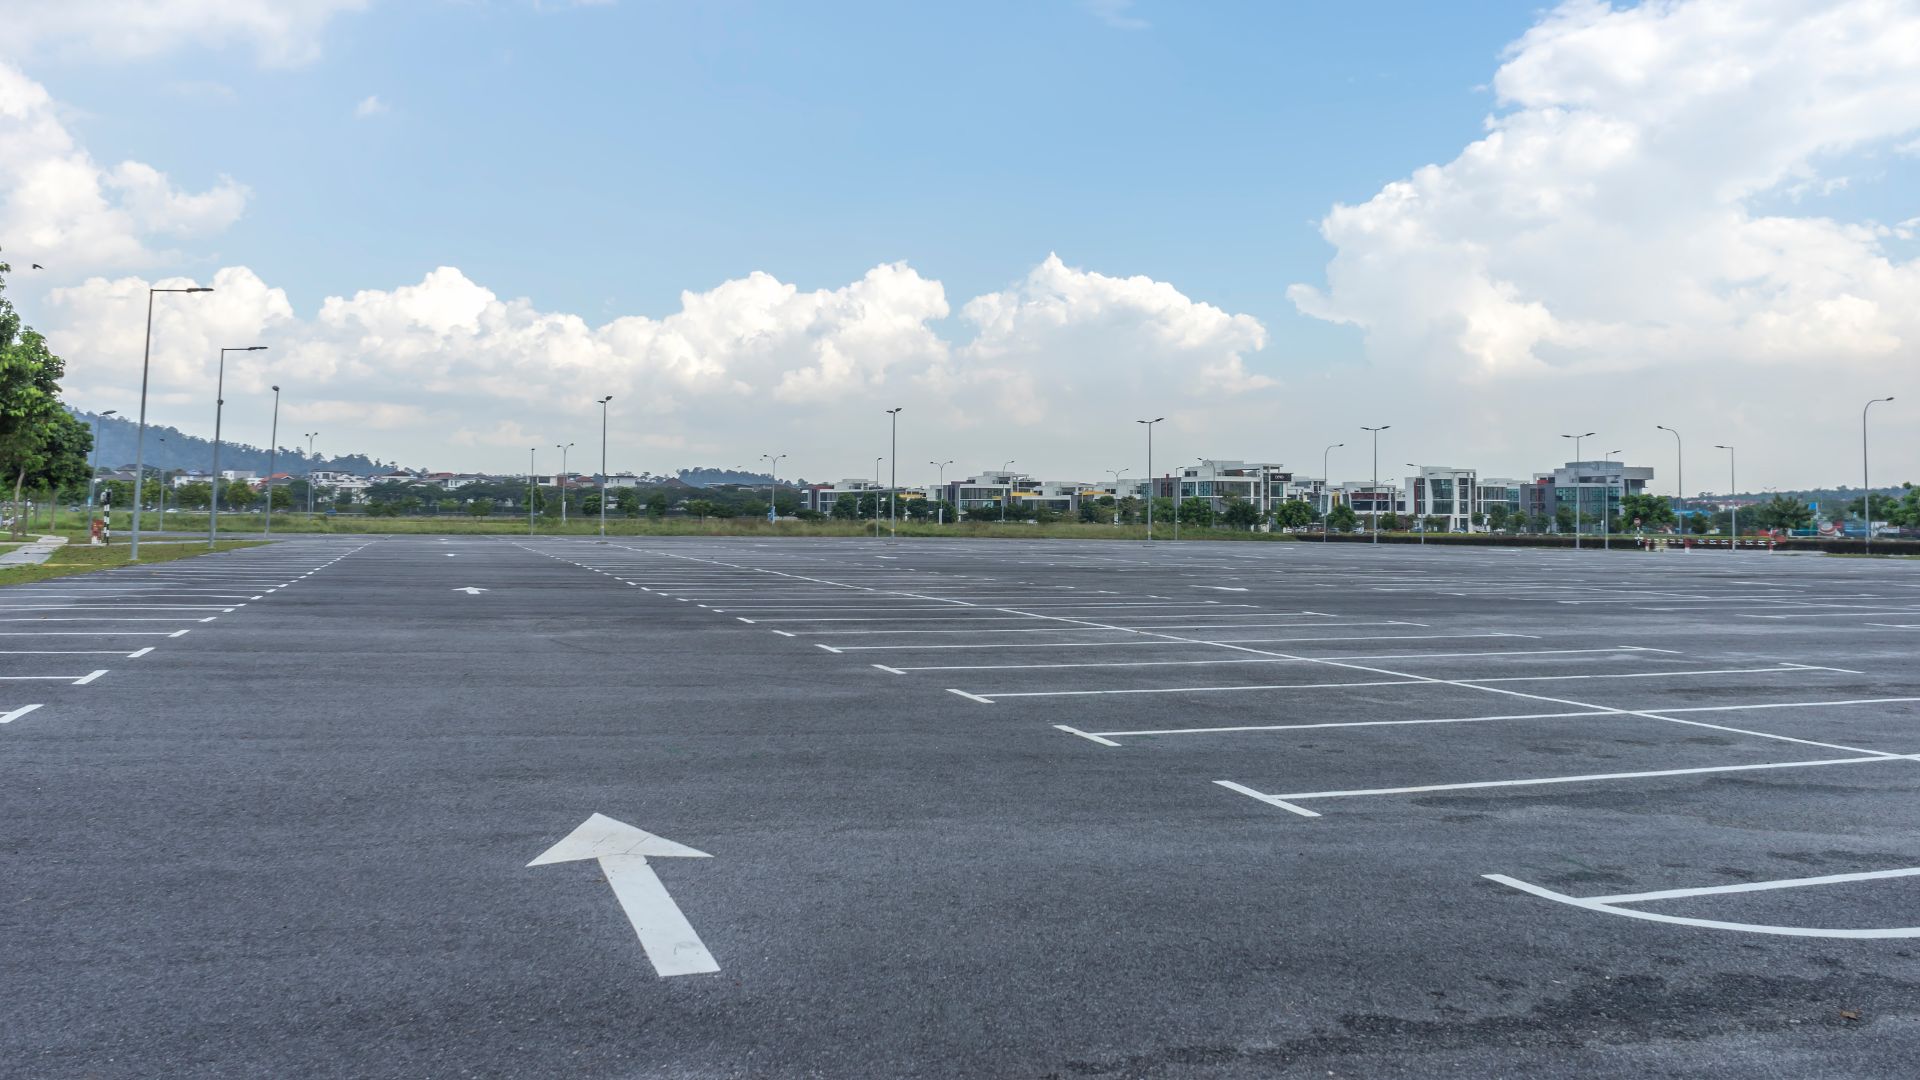 an empty parking lot with an arrow painted on it.